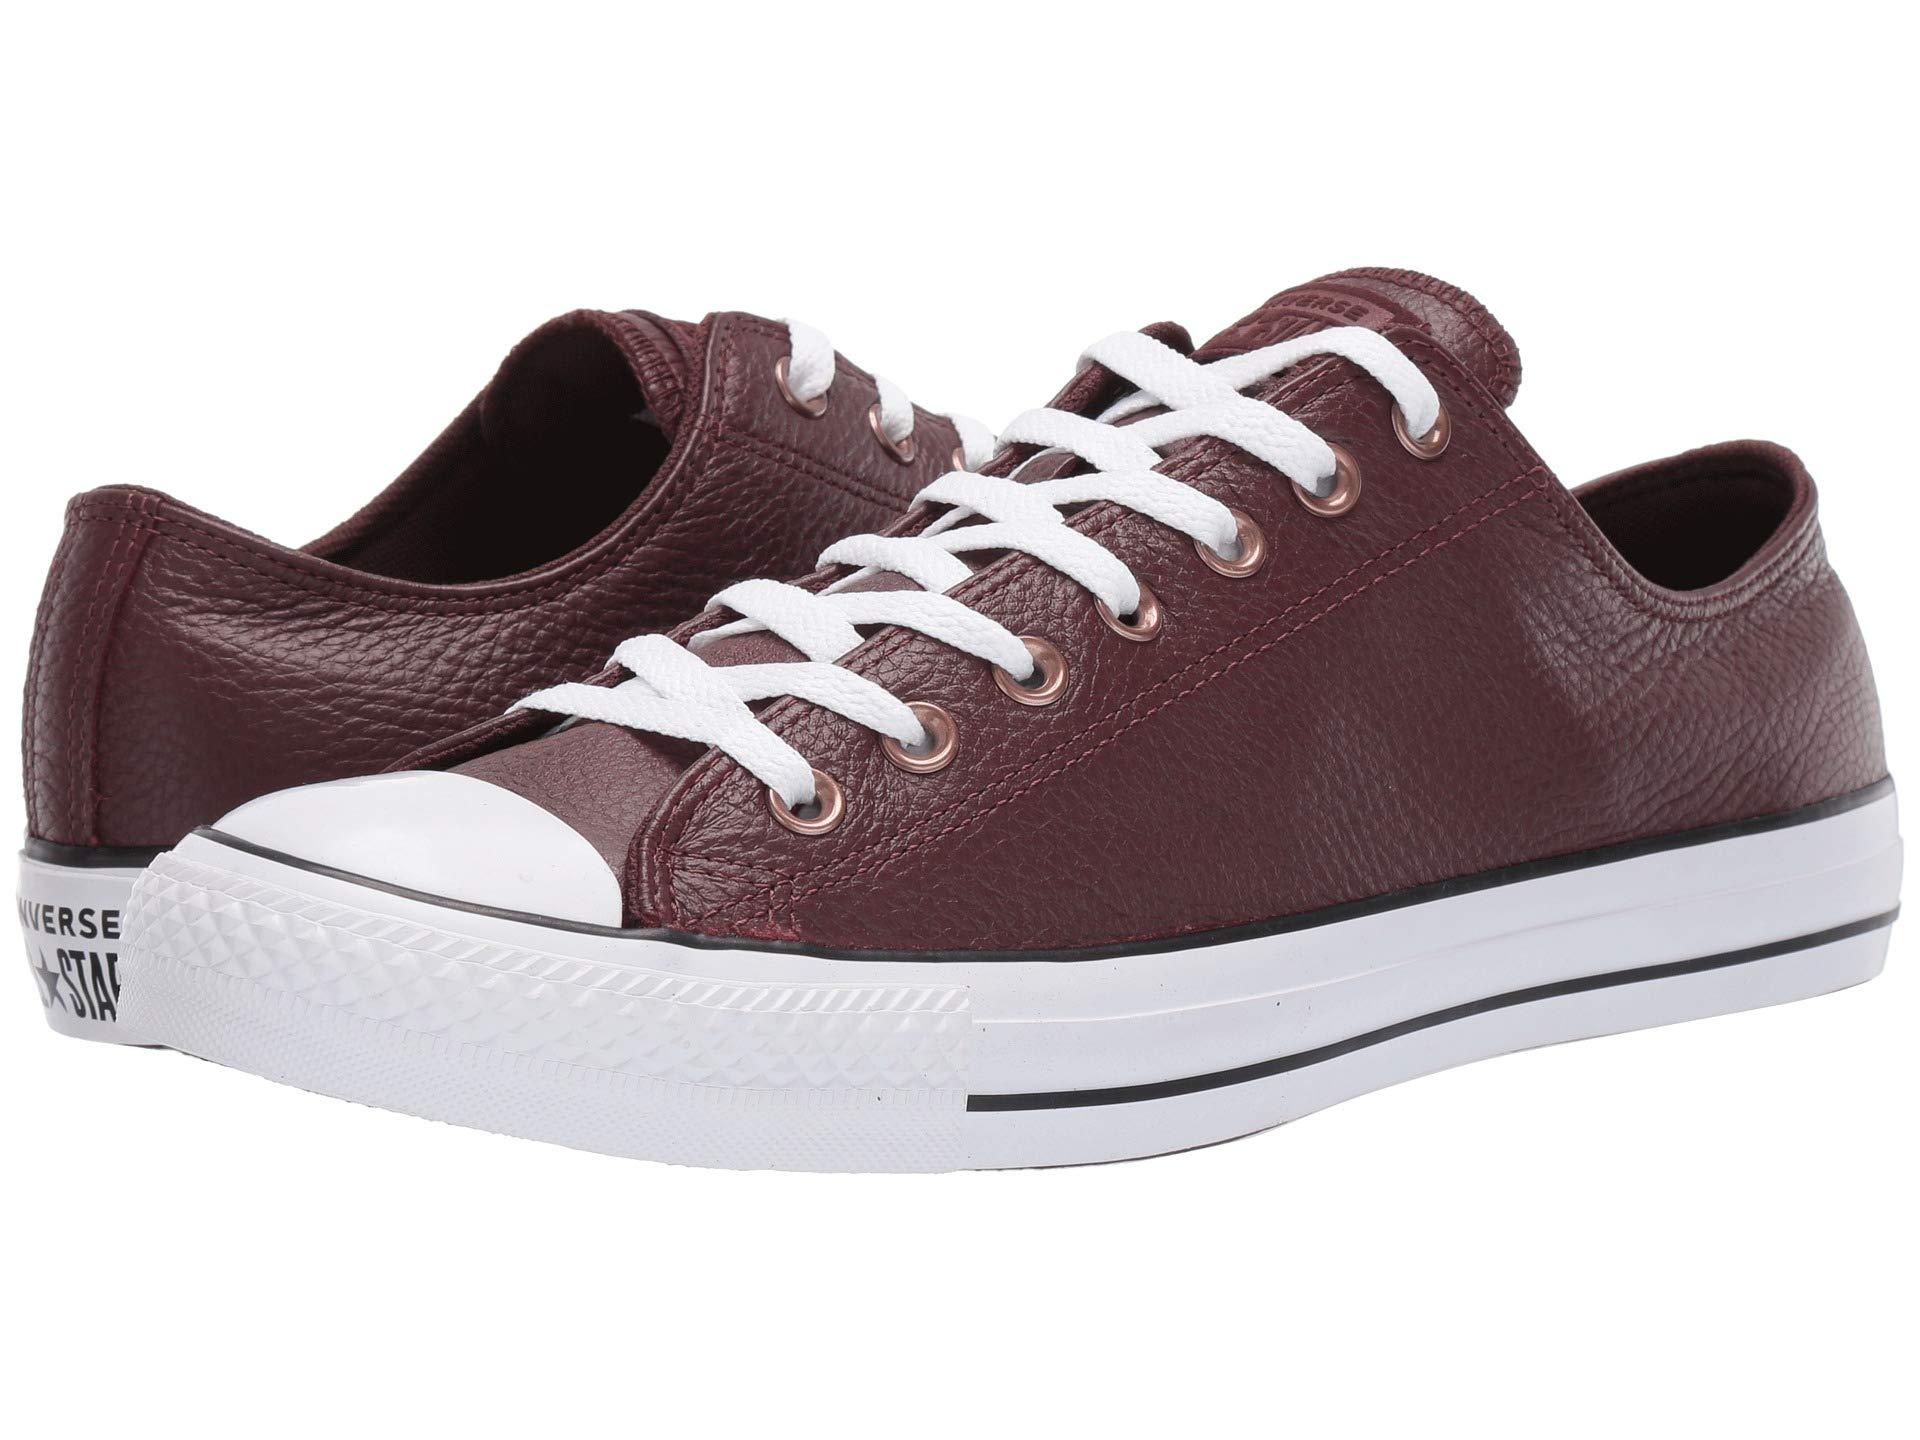 Converse Chuck Taylor All Star Leather - Ox in Brown - Lyst